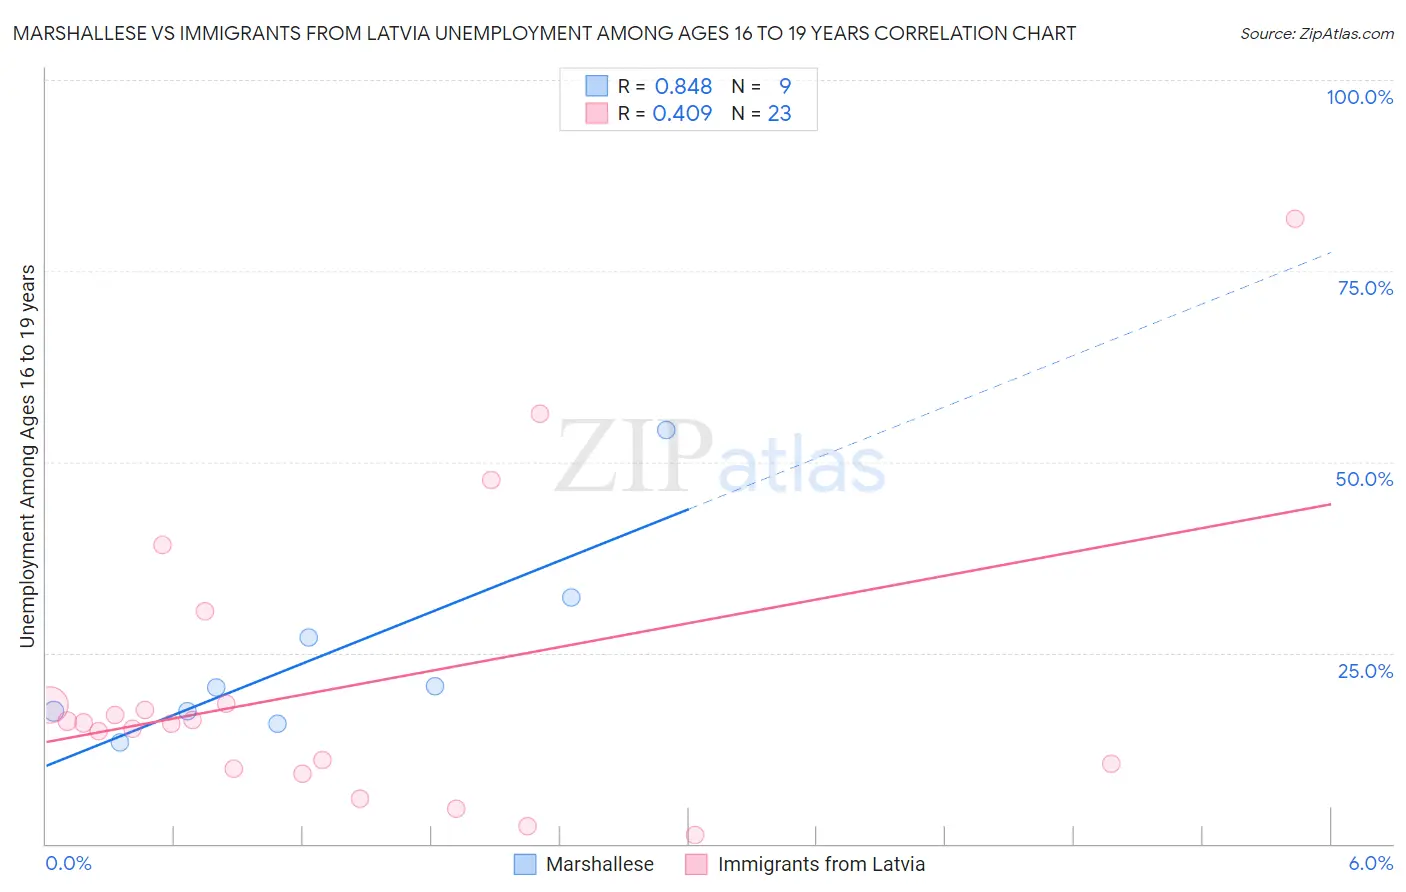 Marshallese vs Immigrants from Latvia Unemployment Among Ages 16 to 19 years